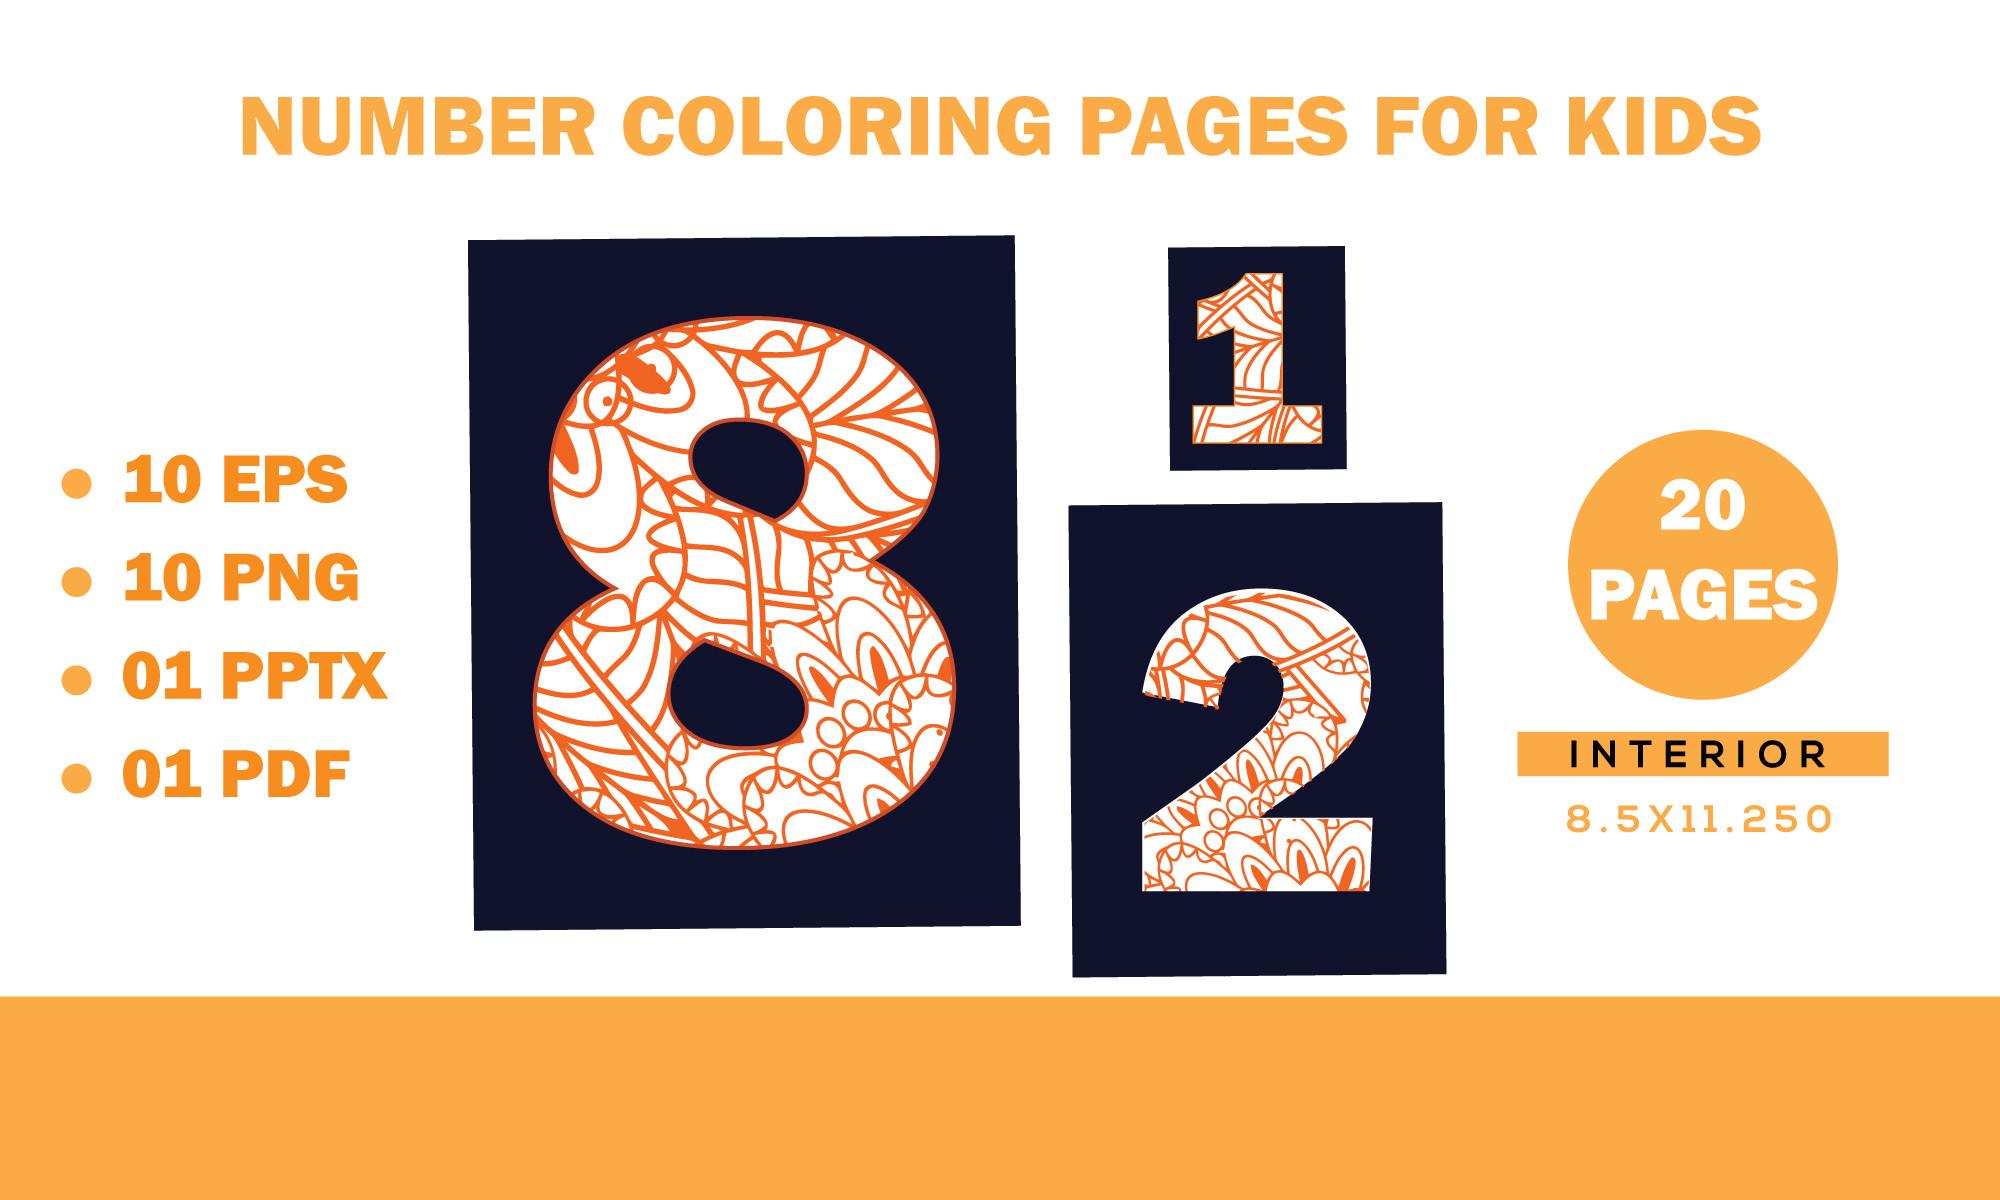 Number Coloring Pages for Kids 1 to 10